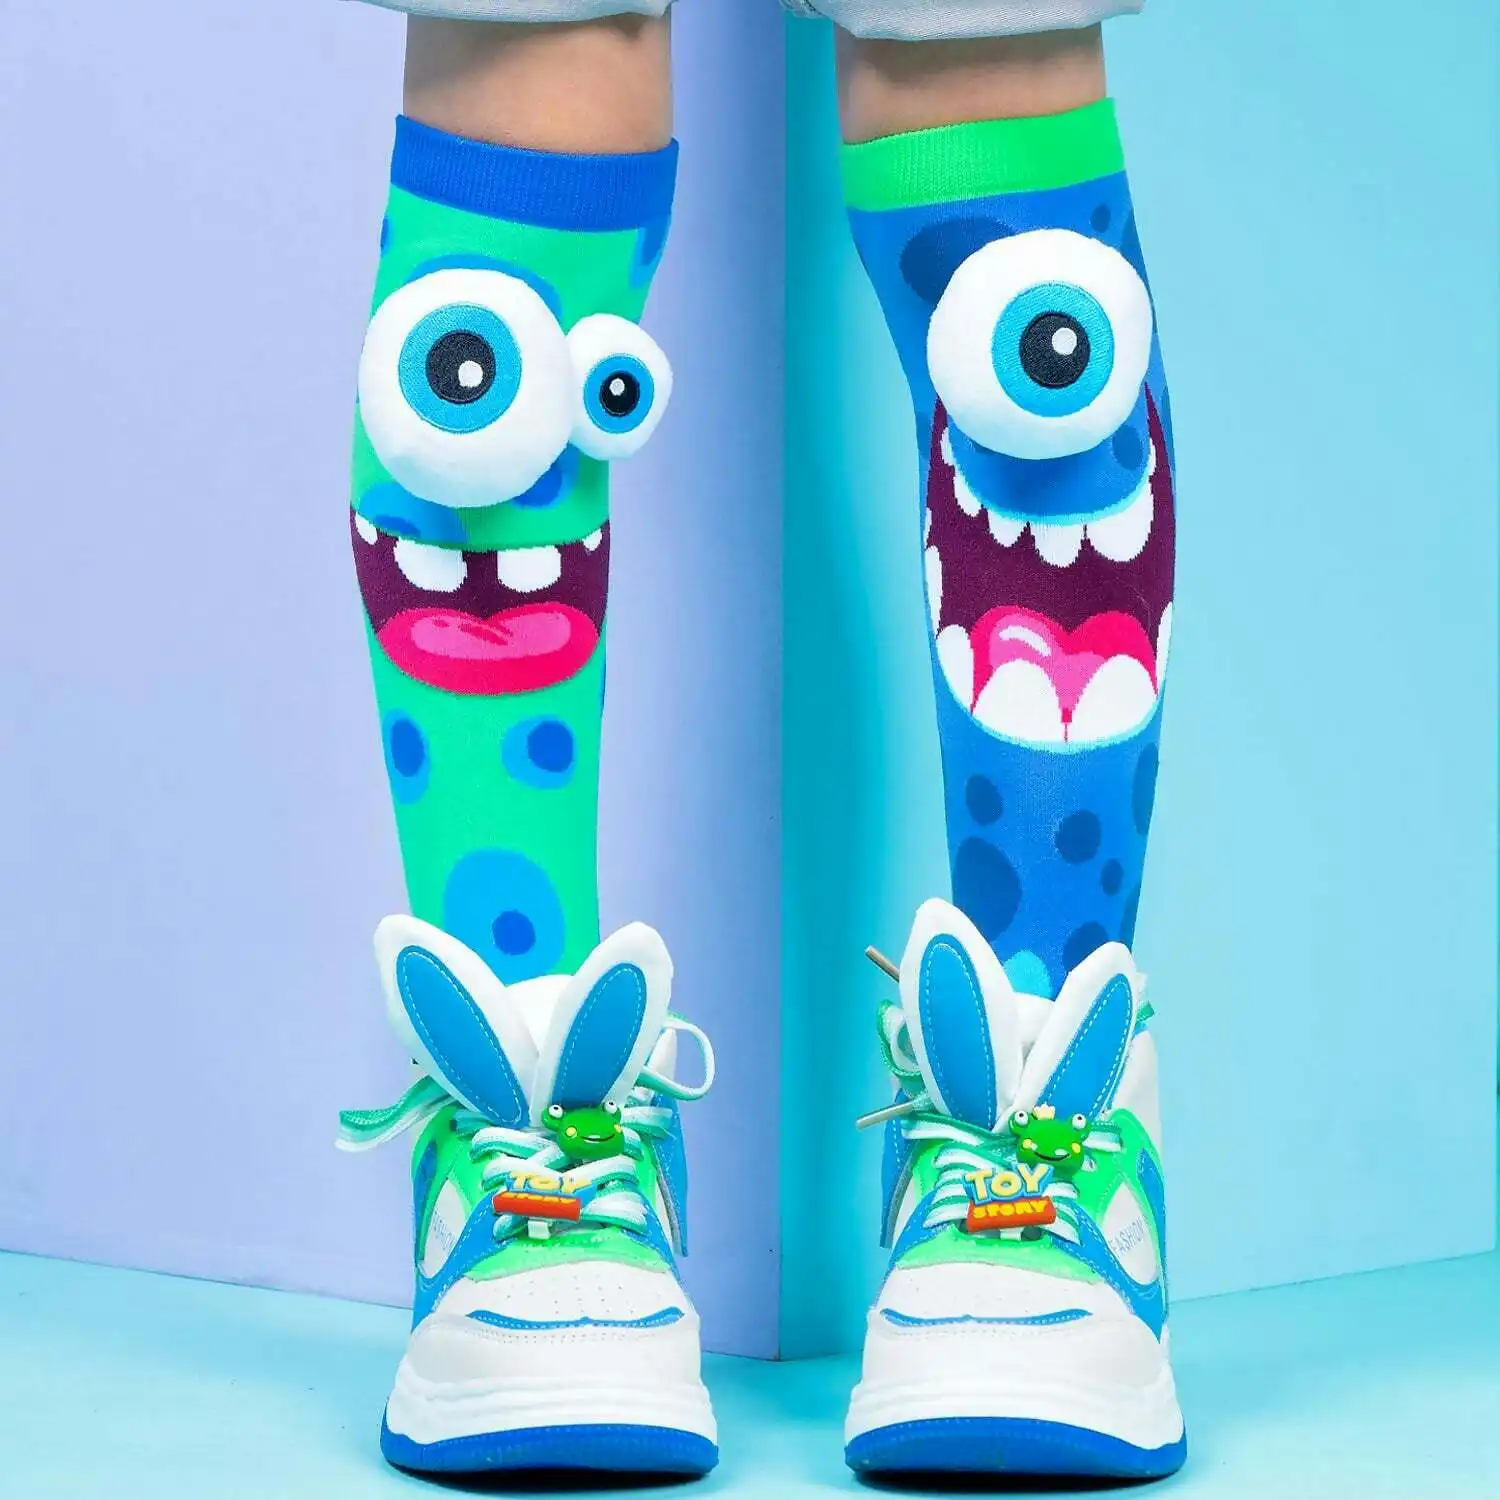 MADMIA -Silly Monsters Socks Kids & Adults Age 6y+